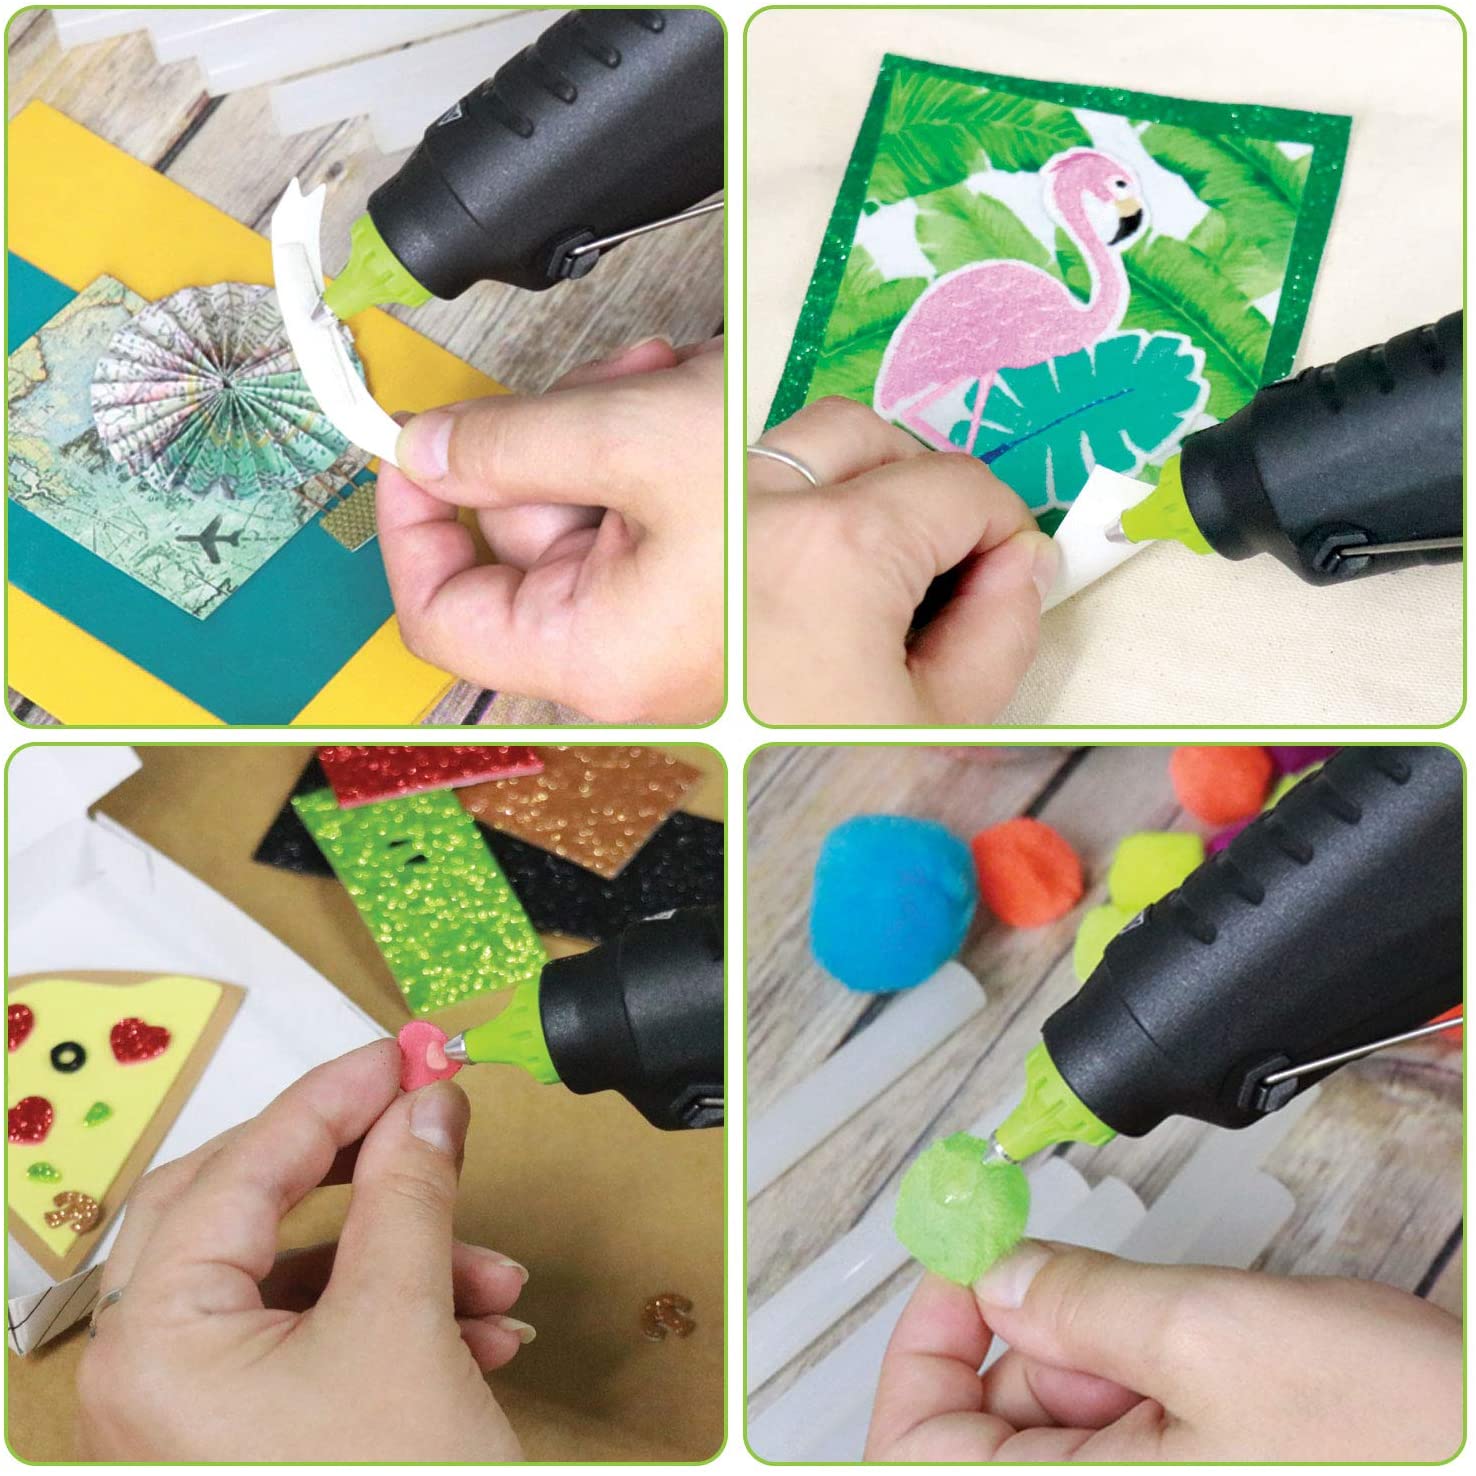 Hot glue gun useful for crafting and DIY work Cherkov art and creation